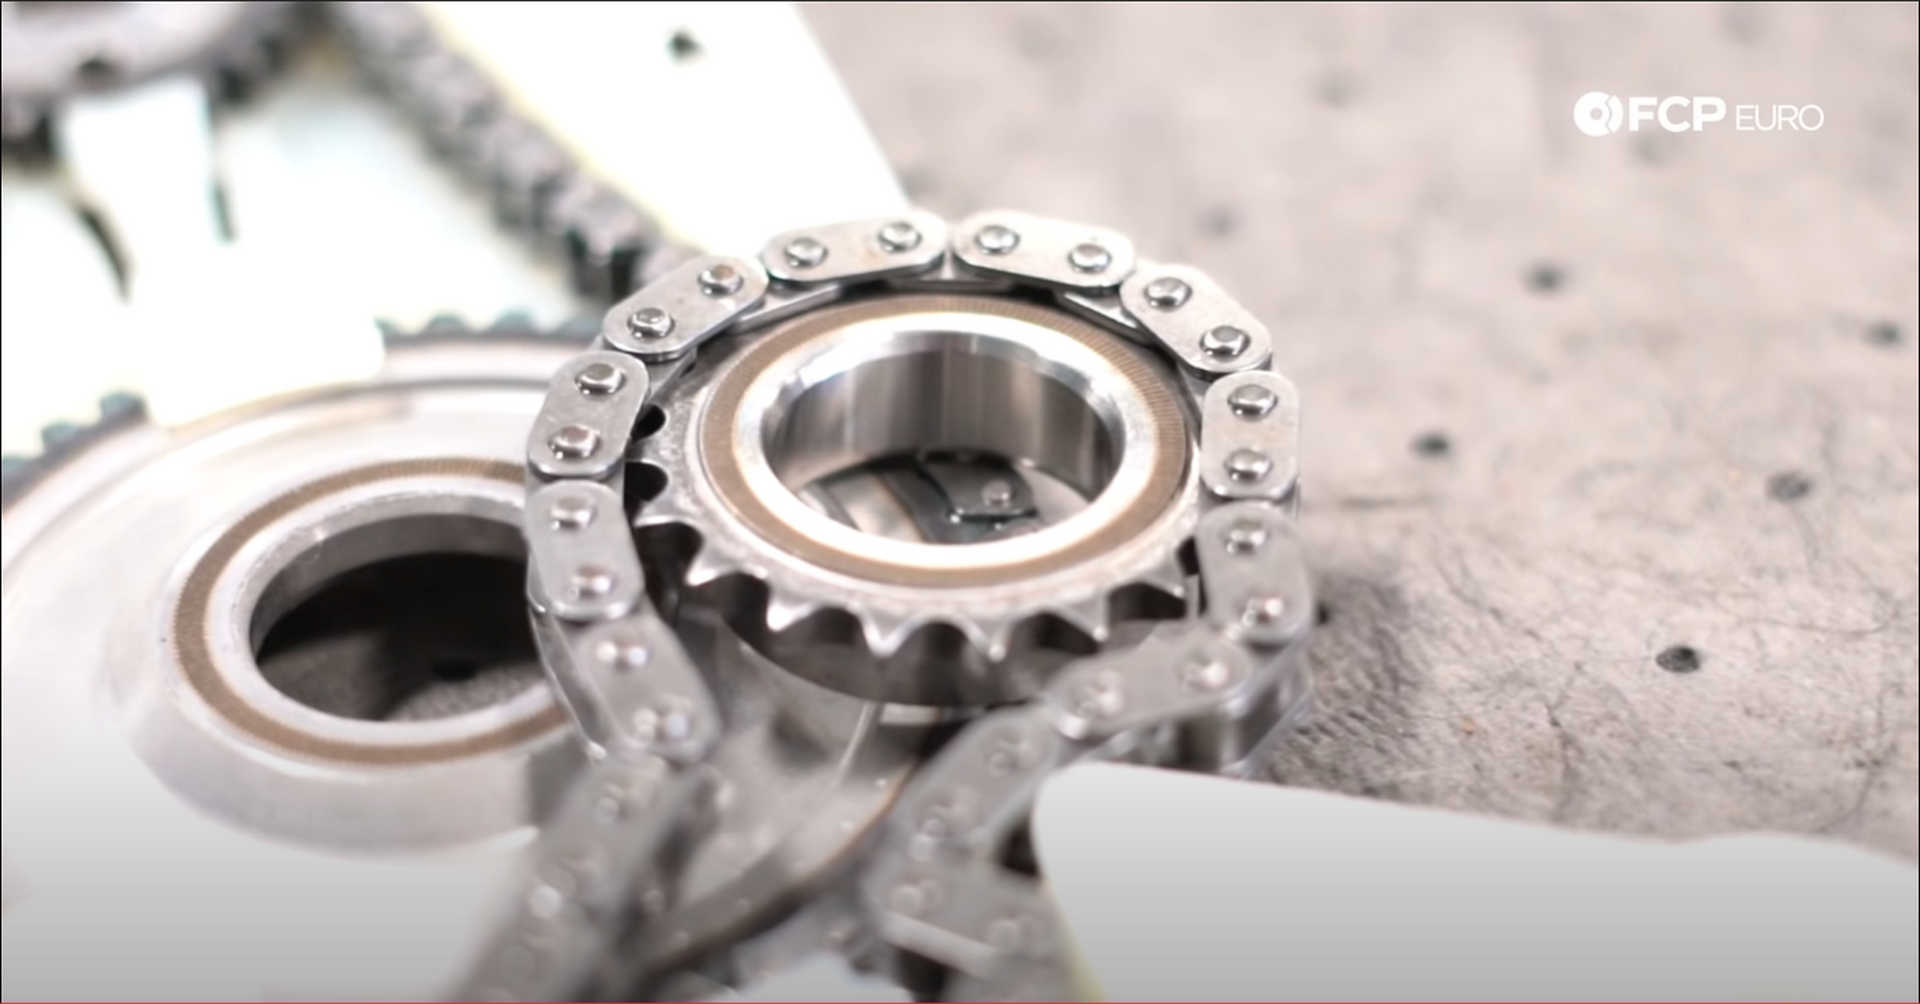 DIY BMW N20 Timing Chain new timing chain sprocket